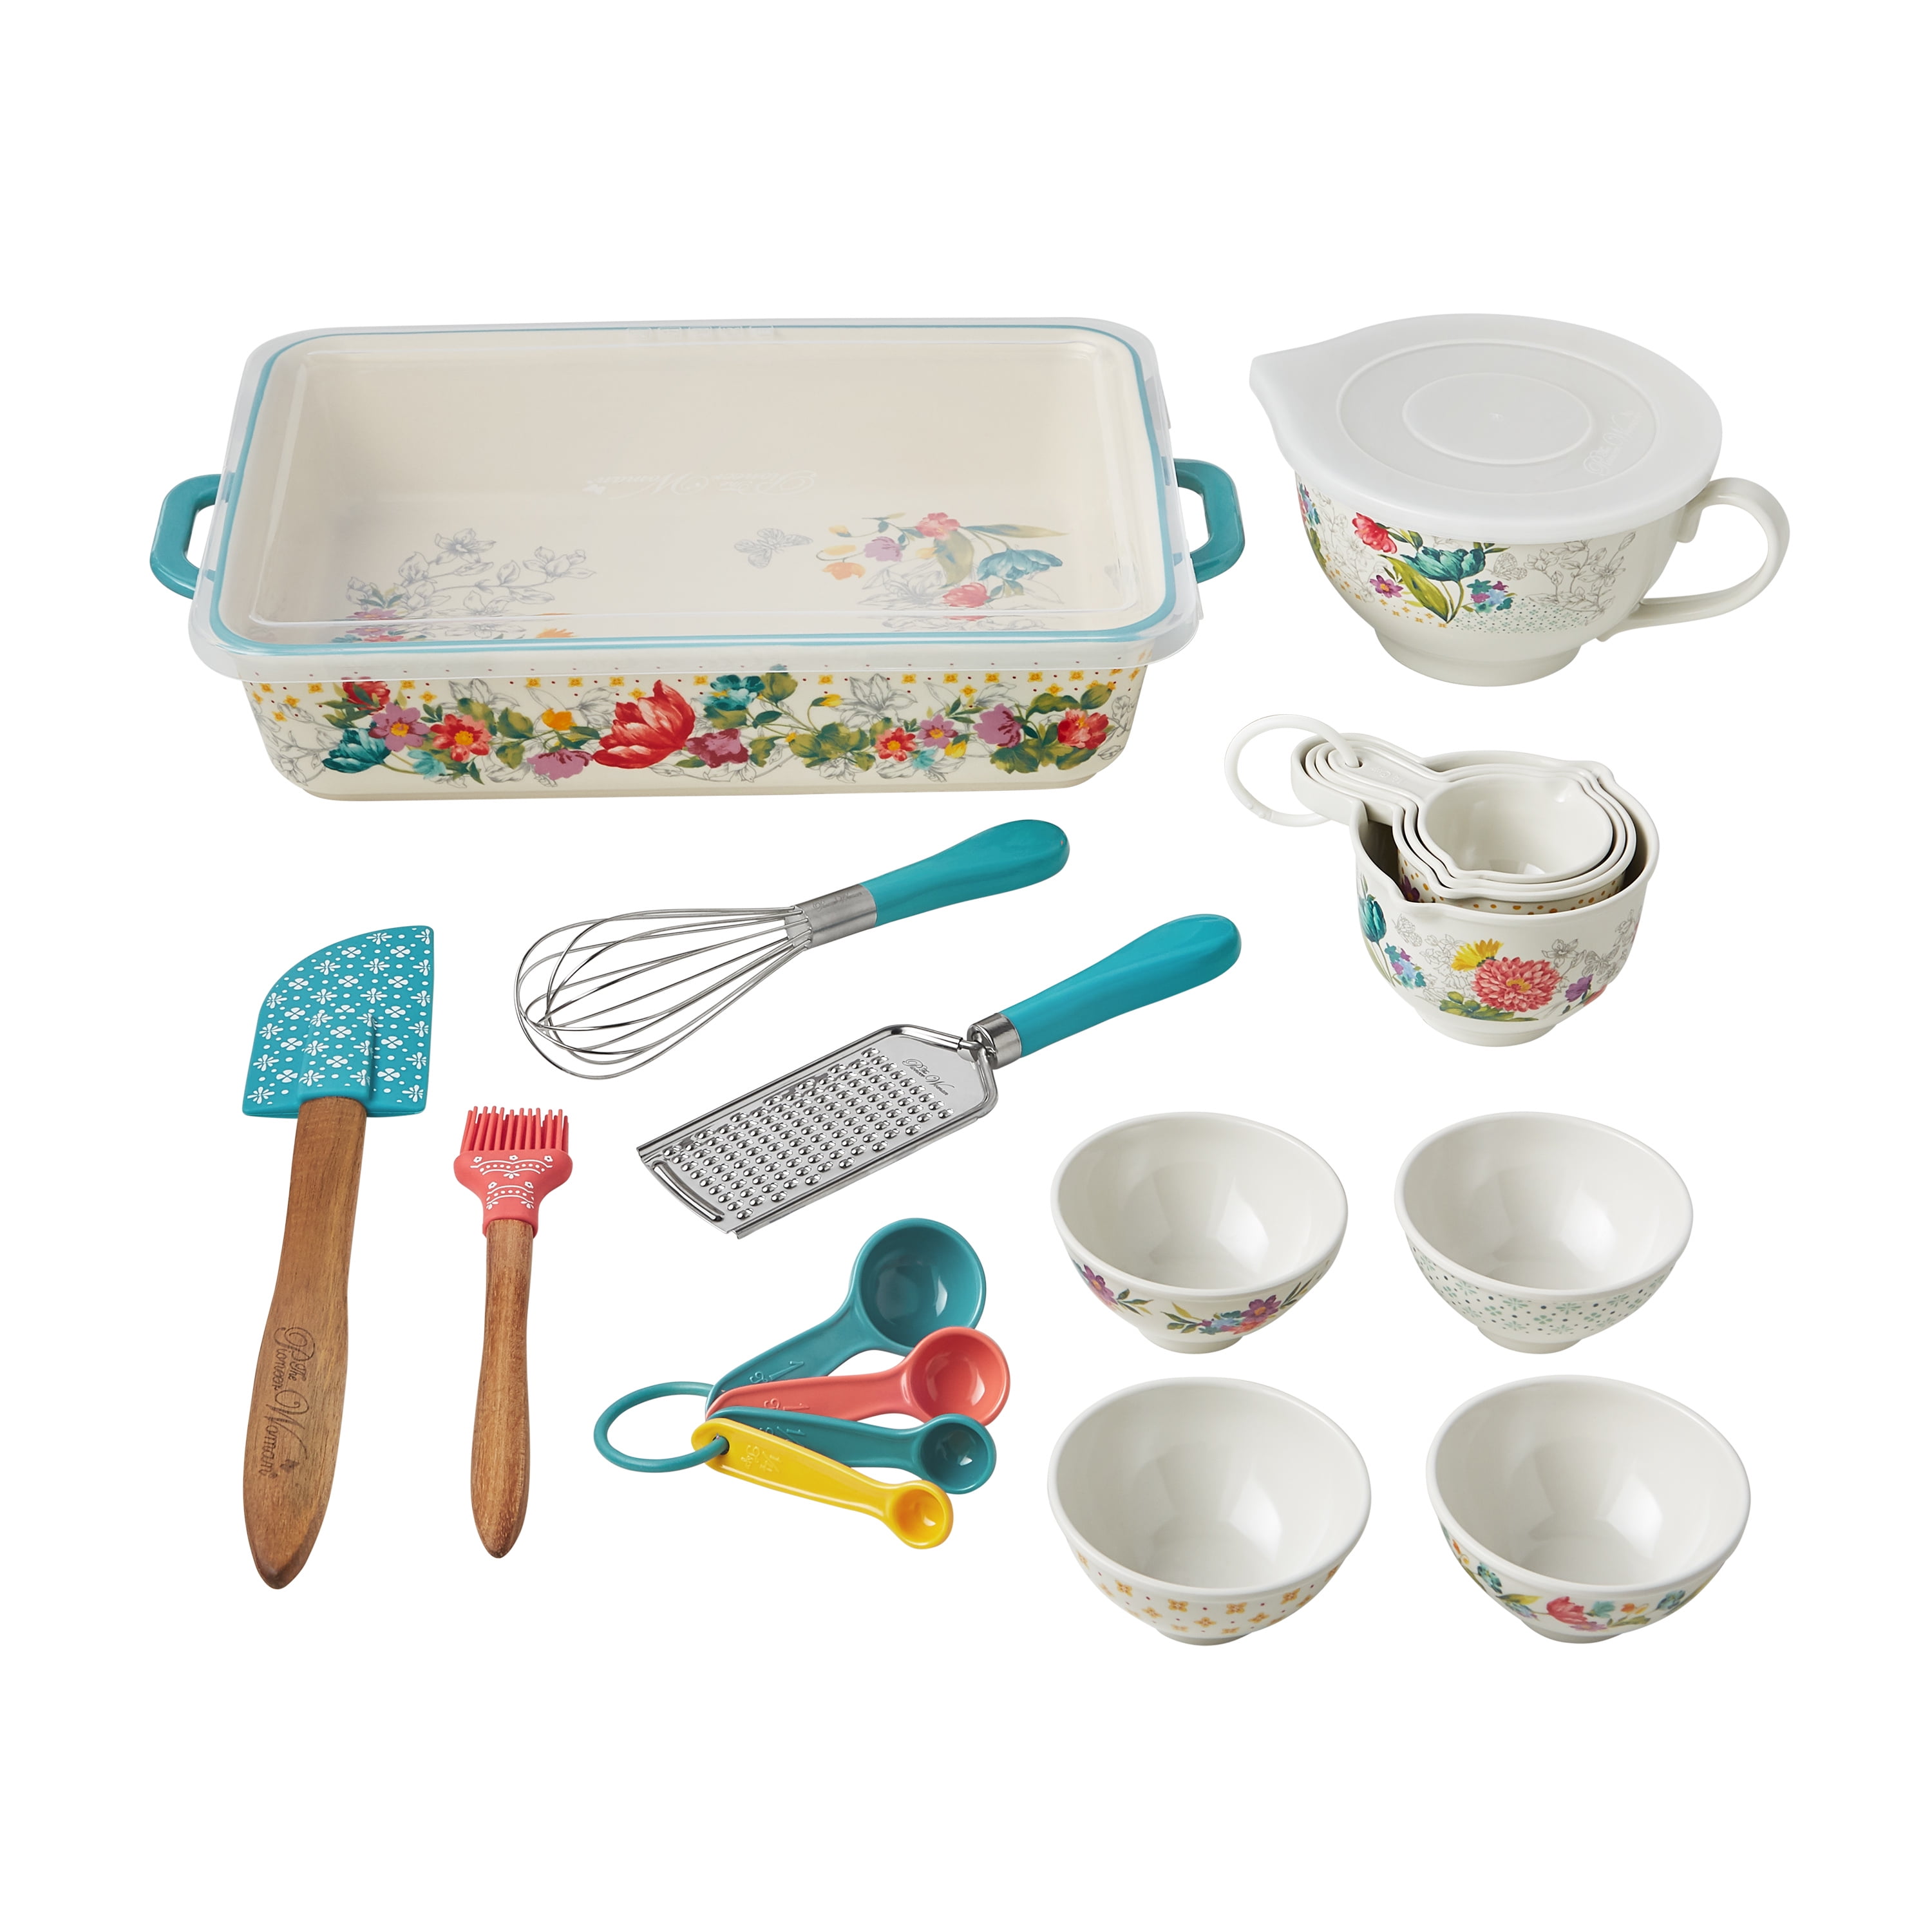 20-Piece Pioneer Woman Bake & Prep Set w/Baking Dish & Measuring Cups only  $20.00